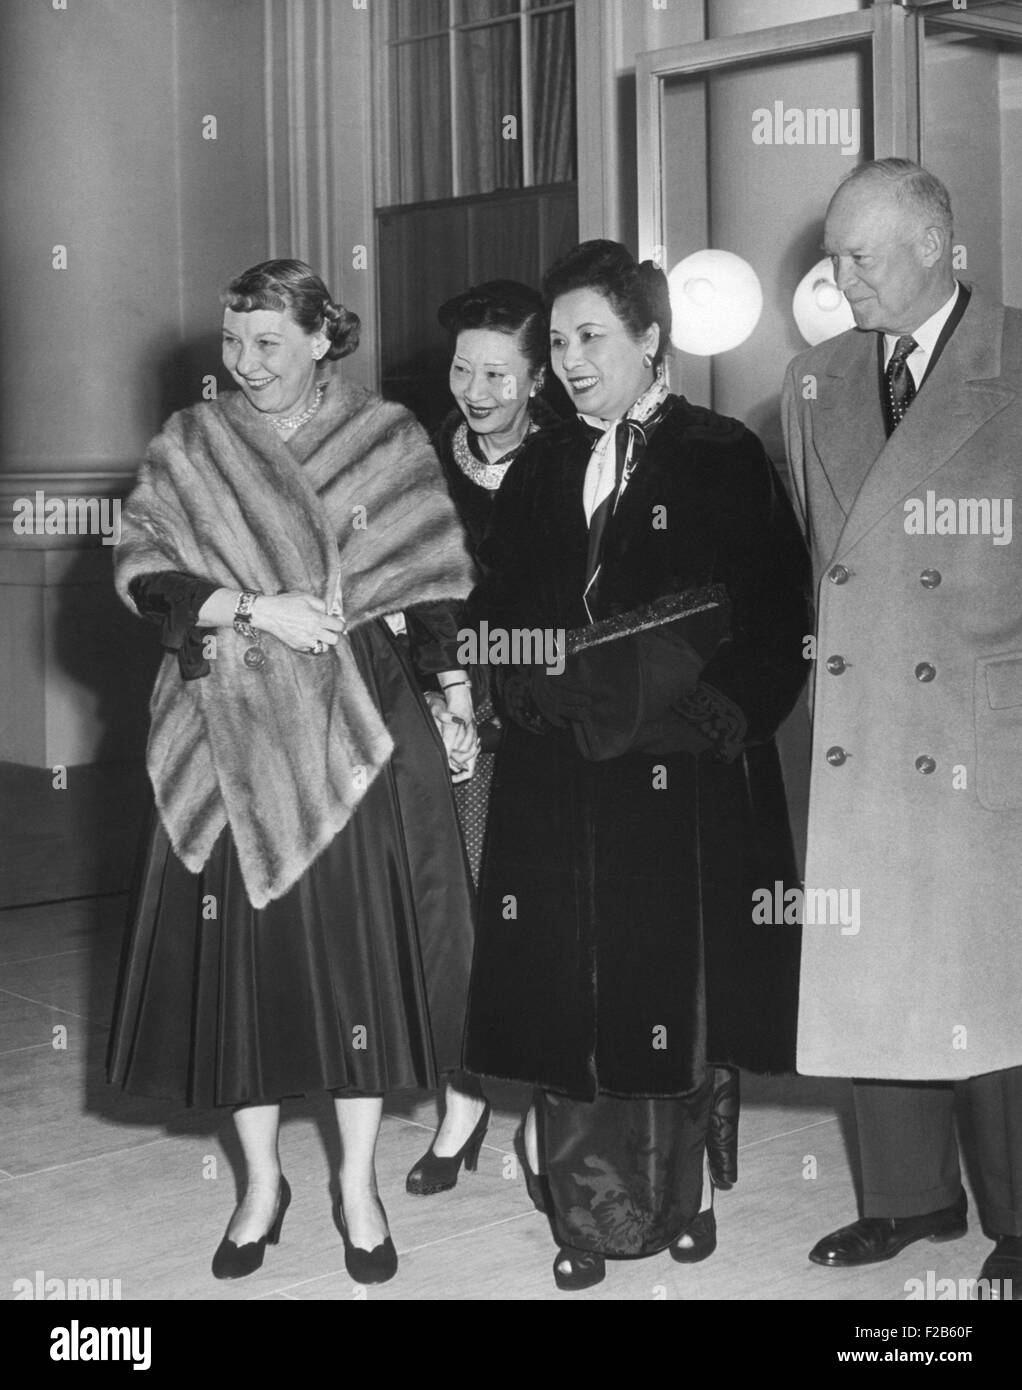 President and First Lady Mamie Eisenhower gave an informal tea for Madame Chiang Kai-shek. Pictured with her is Mrs. Wellingon Koo, wife of the Rep. of China. Ambassador to the U.S. March 9, 1953. - (BSLOC 2014 16 200) Stock Photo